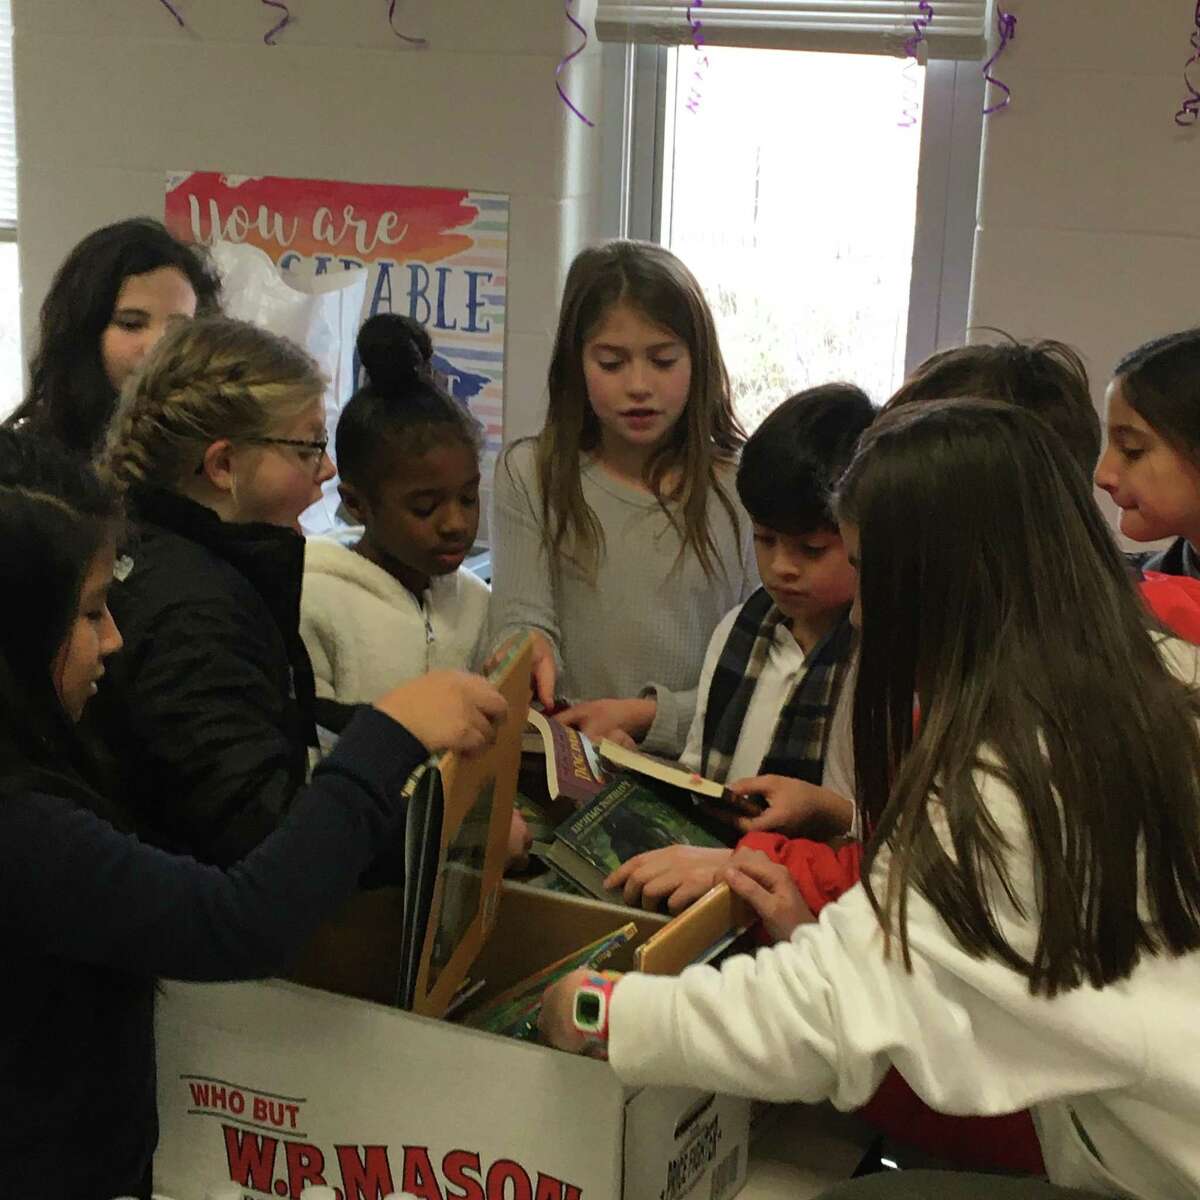 South School students, families and staff in New Canaan recently came together and packed more than 700 meal bags for the Filling In The Blanks warehouse. The students also supported a Holiday Book Drive for Geraldine W. Johnson School in Bridgeport.